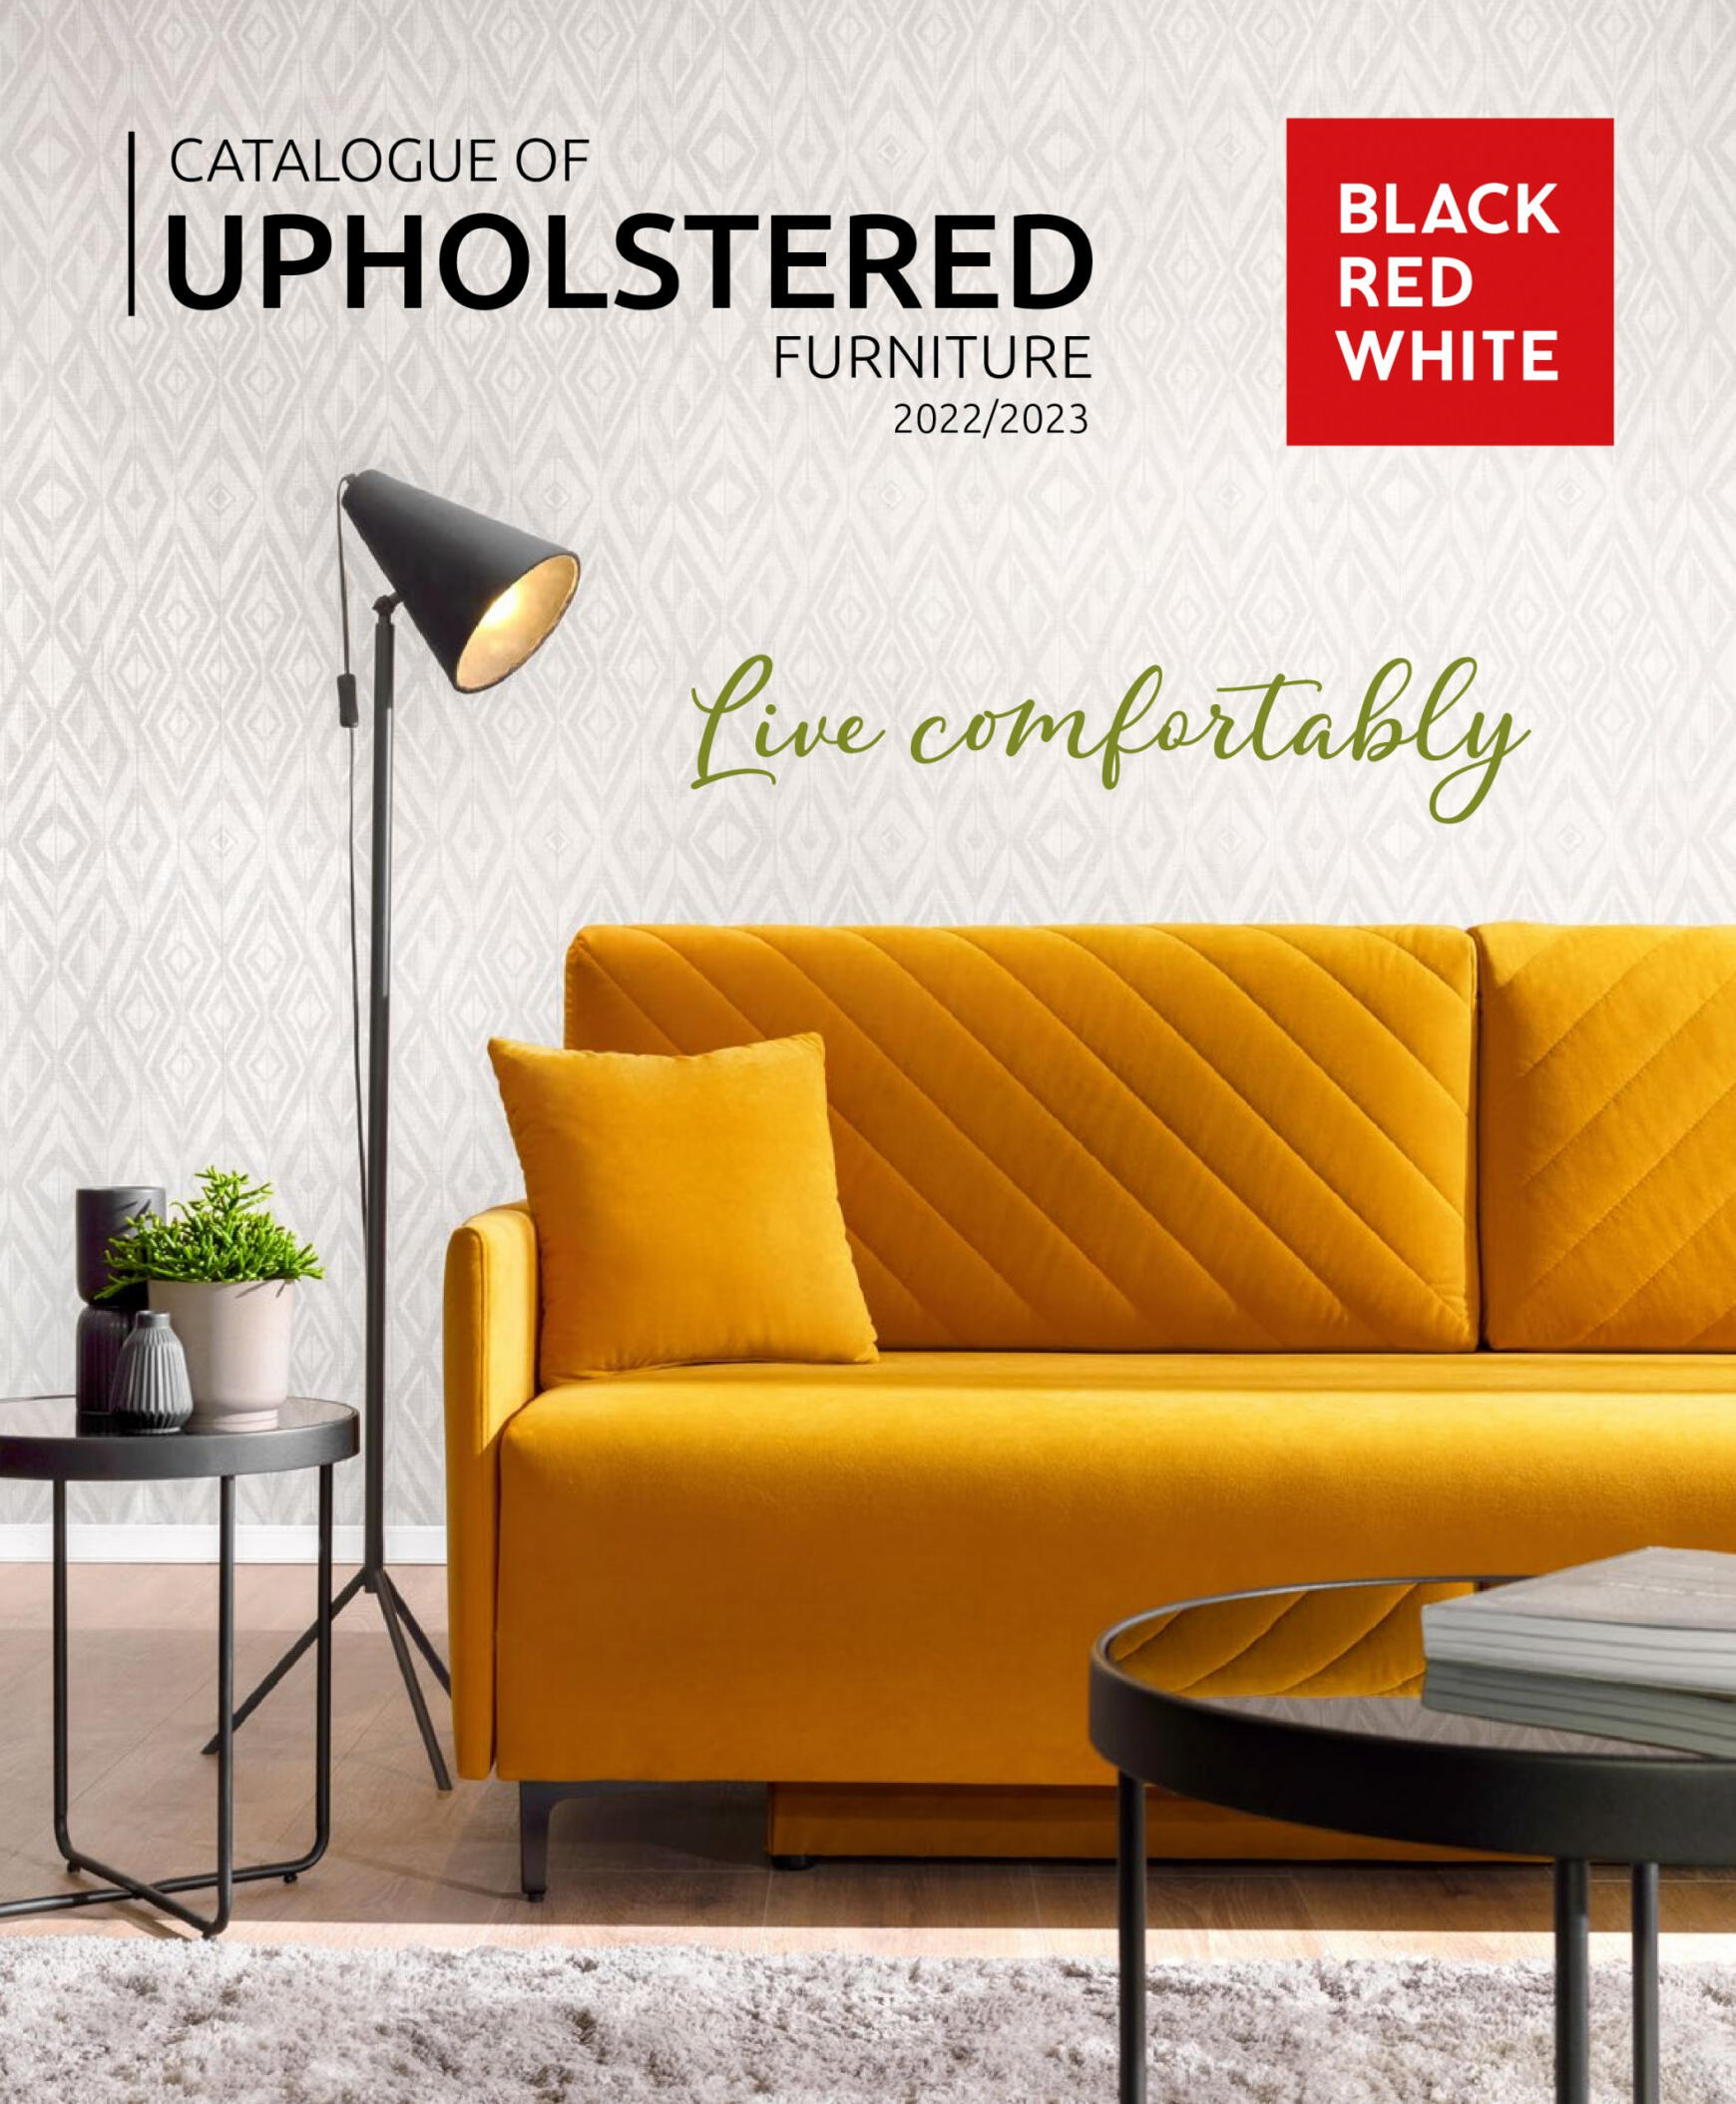 black-red-white - Catalogue of Upholstered Furniture